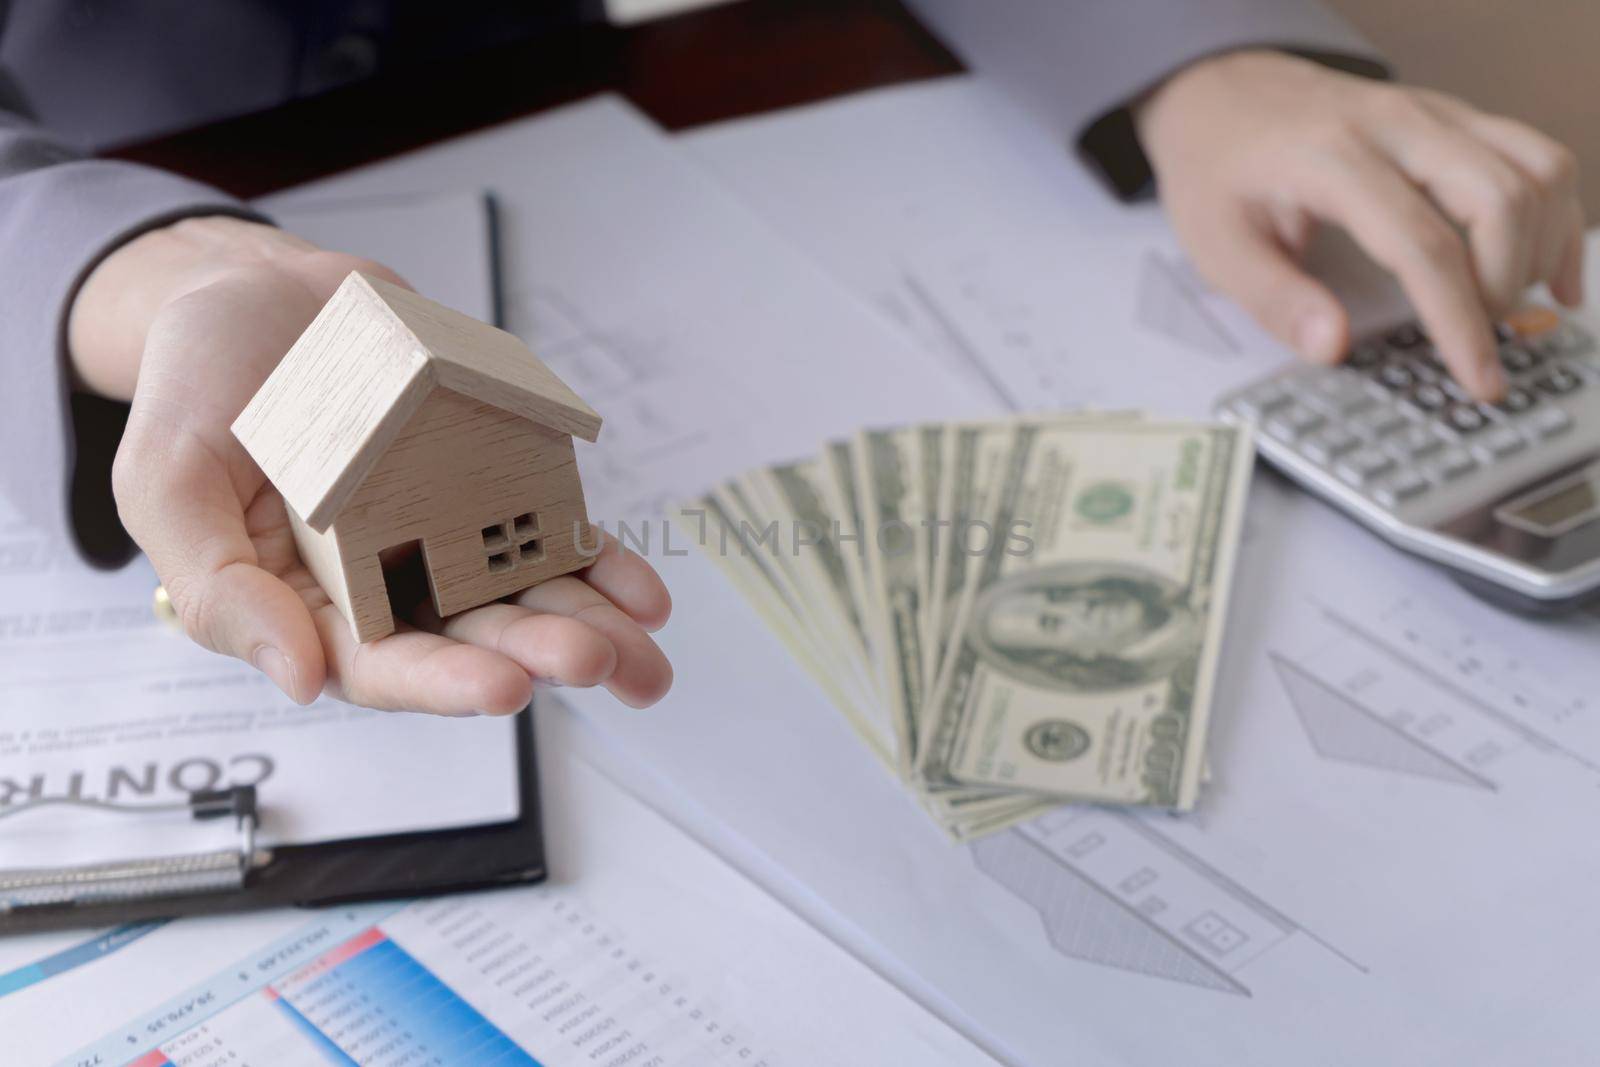 Real estate agent showing a miniature model house to the customer and using calculator. Concept for real estate, moving home or renting property.